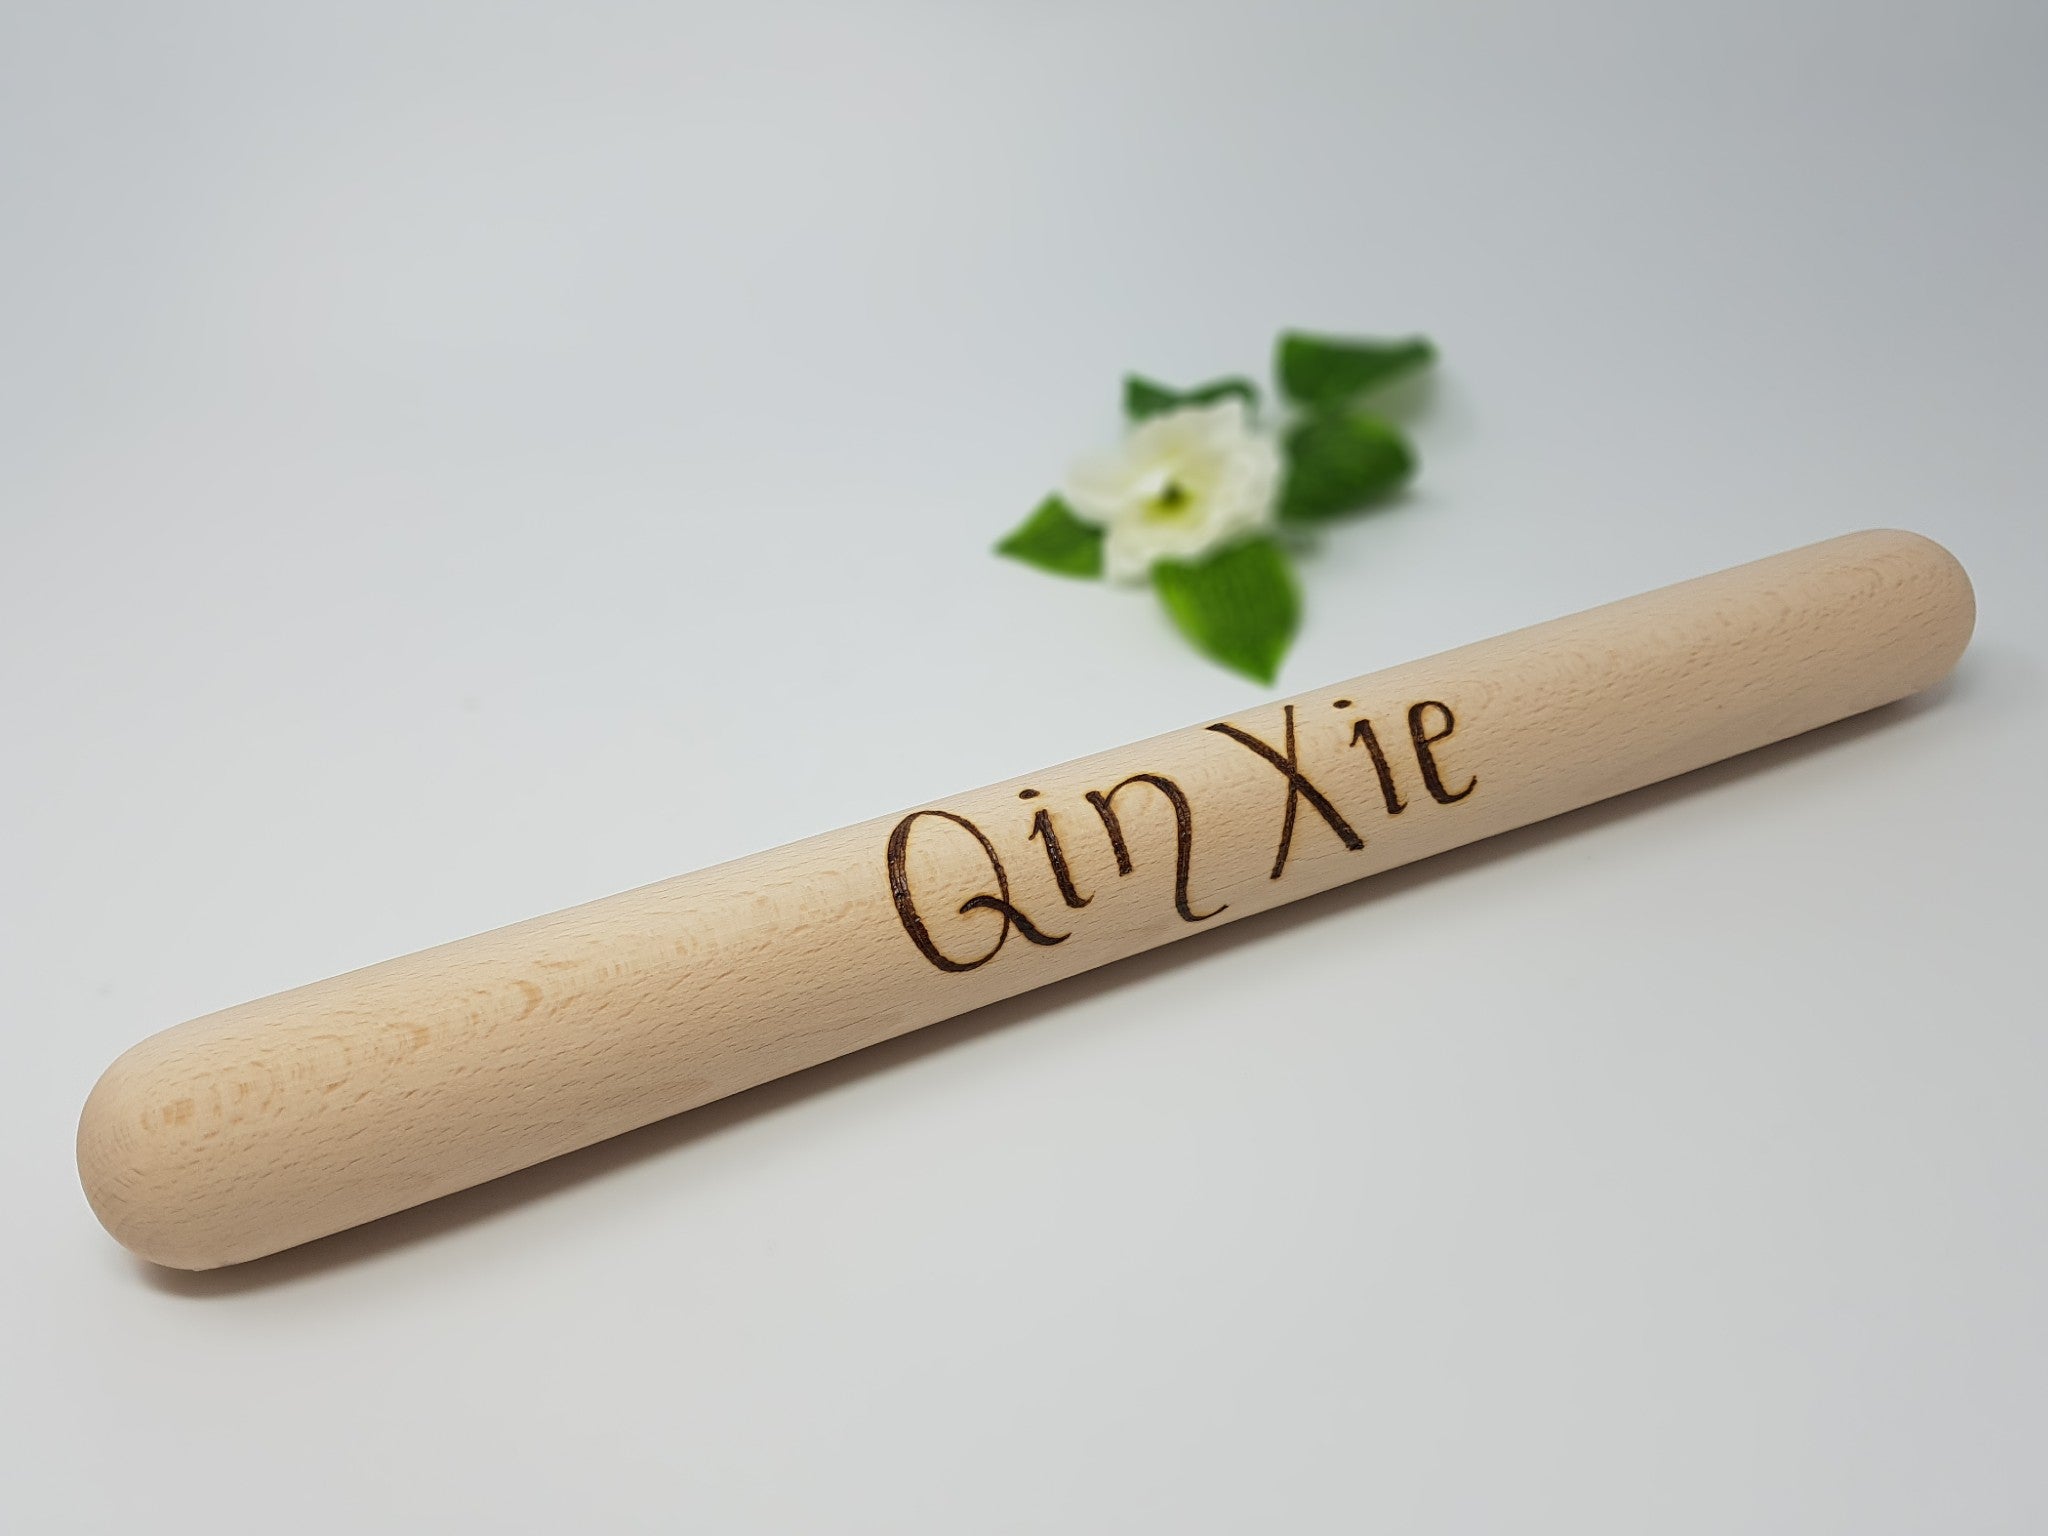 Cove Calligraphy personalised rolling pin indybest.jpeg